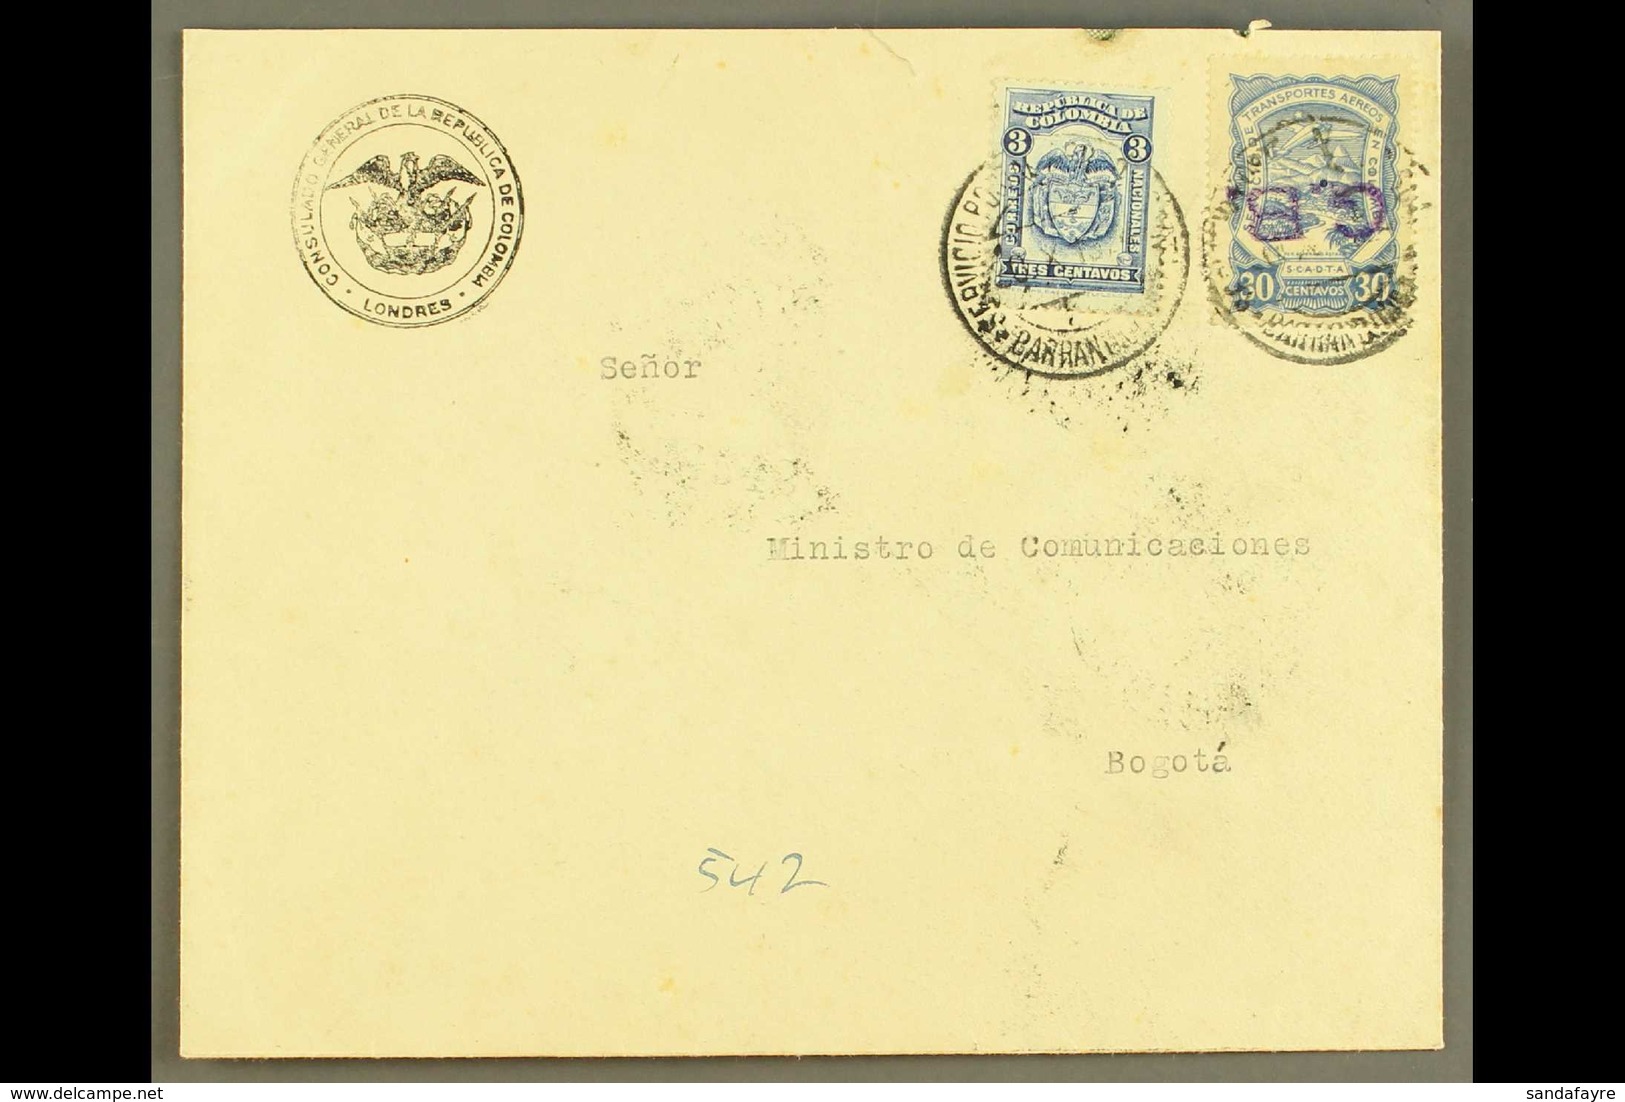 SCADTA 1924 Cover From England Addressed To Bogota, Bearing Colombia 3c And SCADTA 1923 30c With "G.B." Consular INVERTE - Colombia